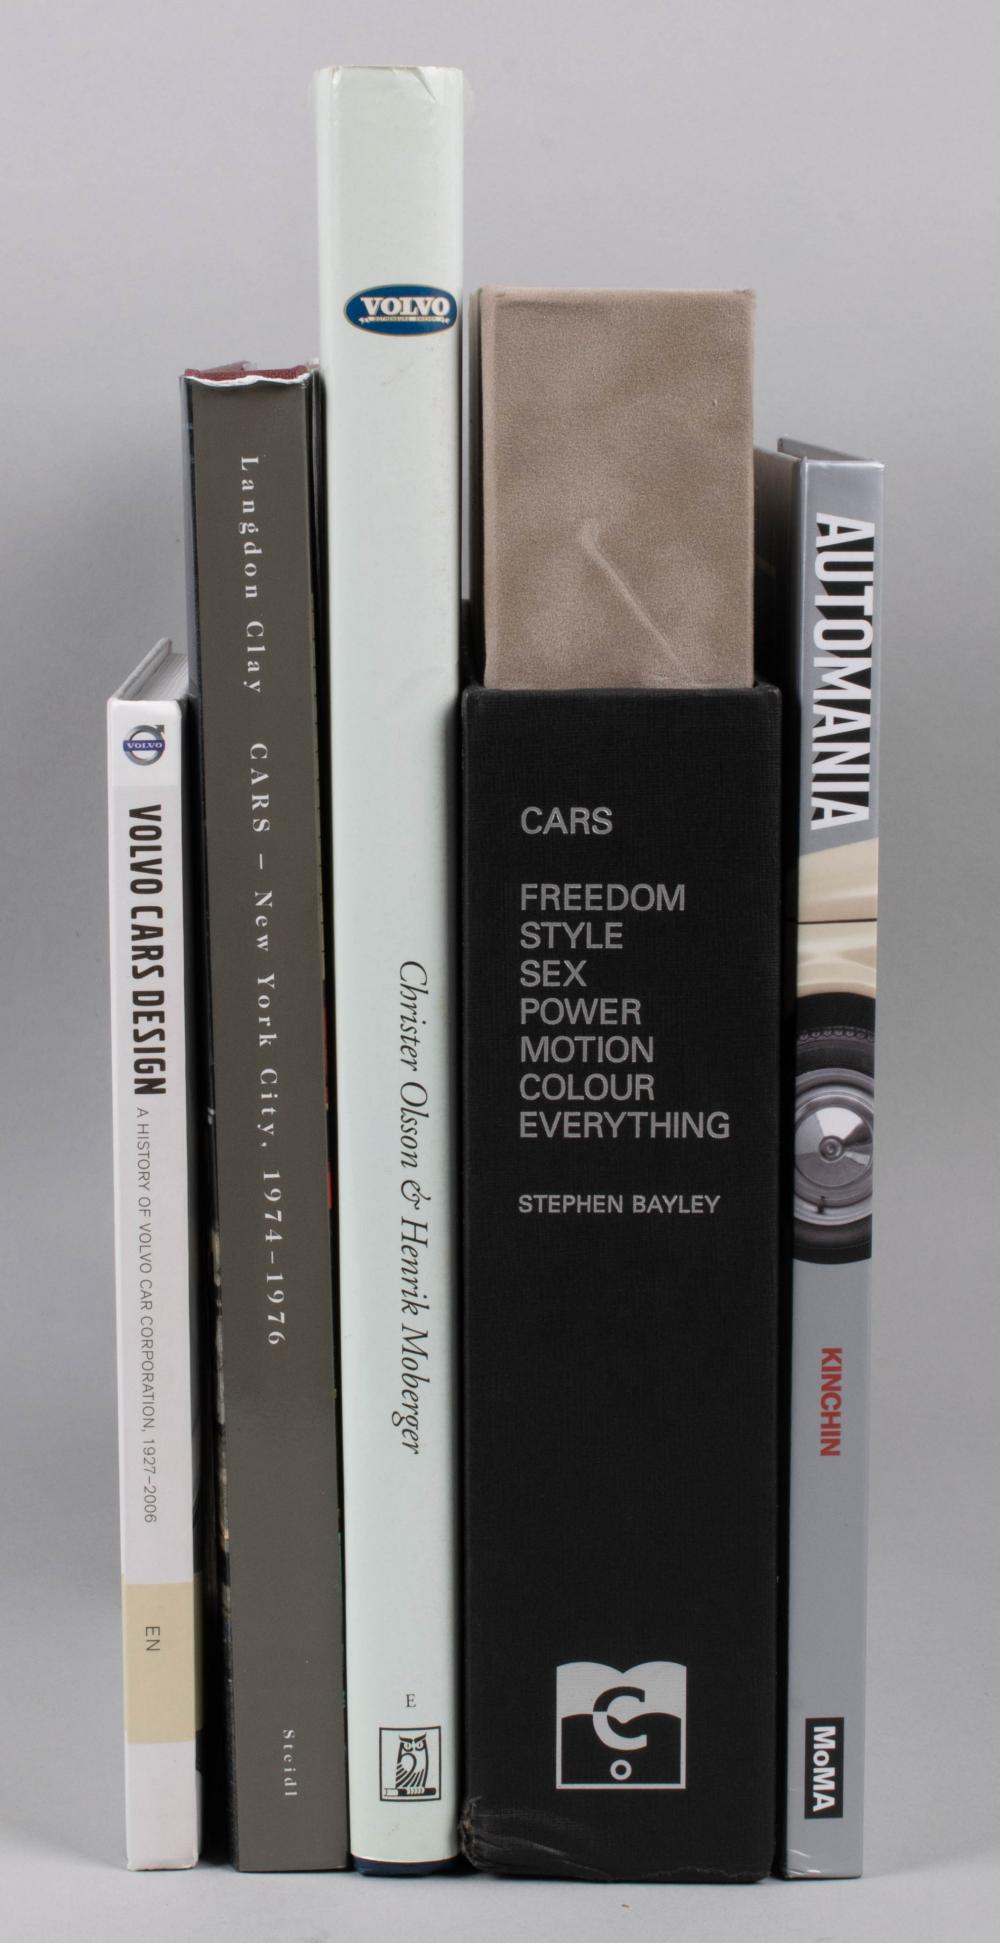 GROUP OF BOOKS ON CARS AND VOLVOSGROUP 33ce78